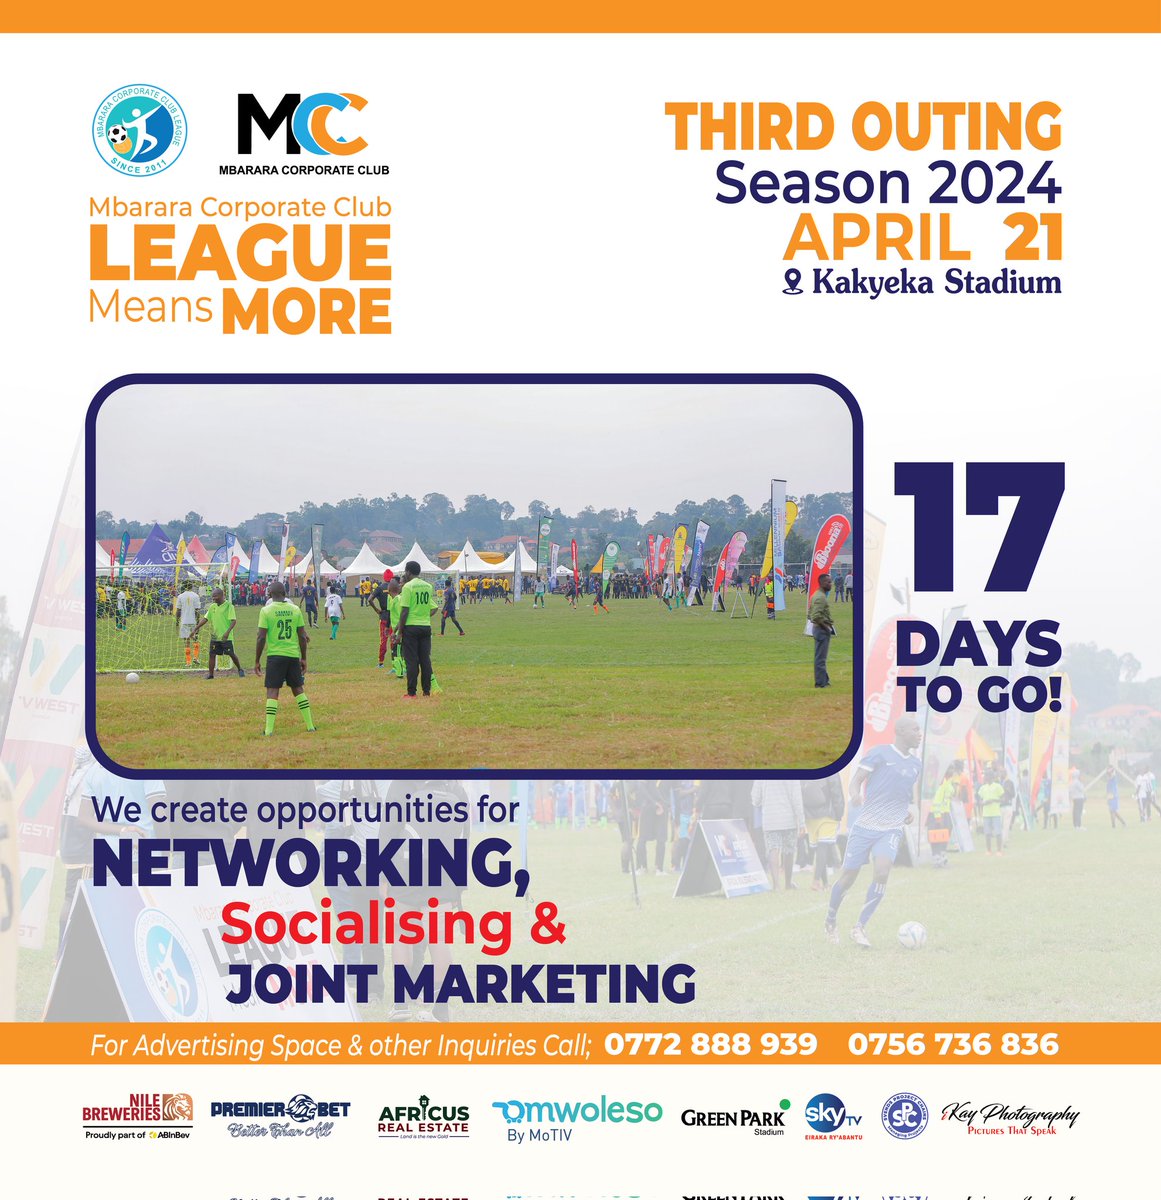 The 3rd Outing of #NBLMCCSeasob24 is just remaining with 17days to go. With us, there is more than just a league. We create opportunities for #Networking #socializing and #jointmarketing 
Join us on 21st at Kakyeka Stadium on 21st April 2024.